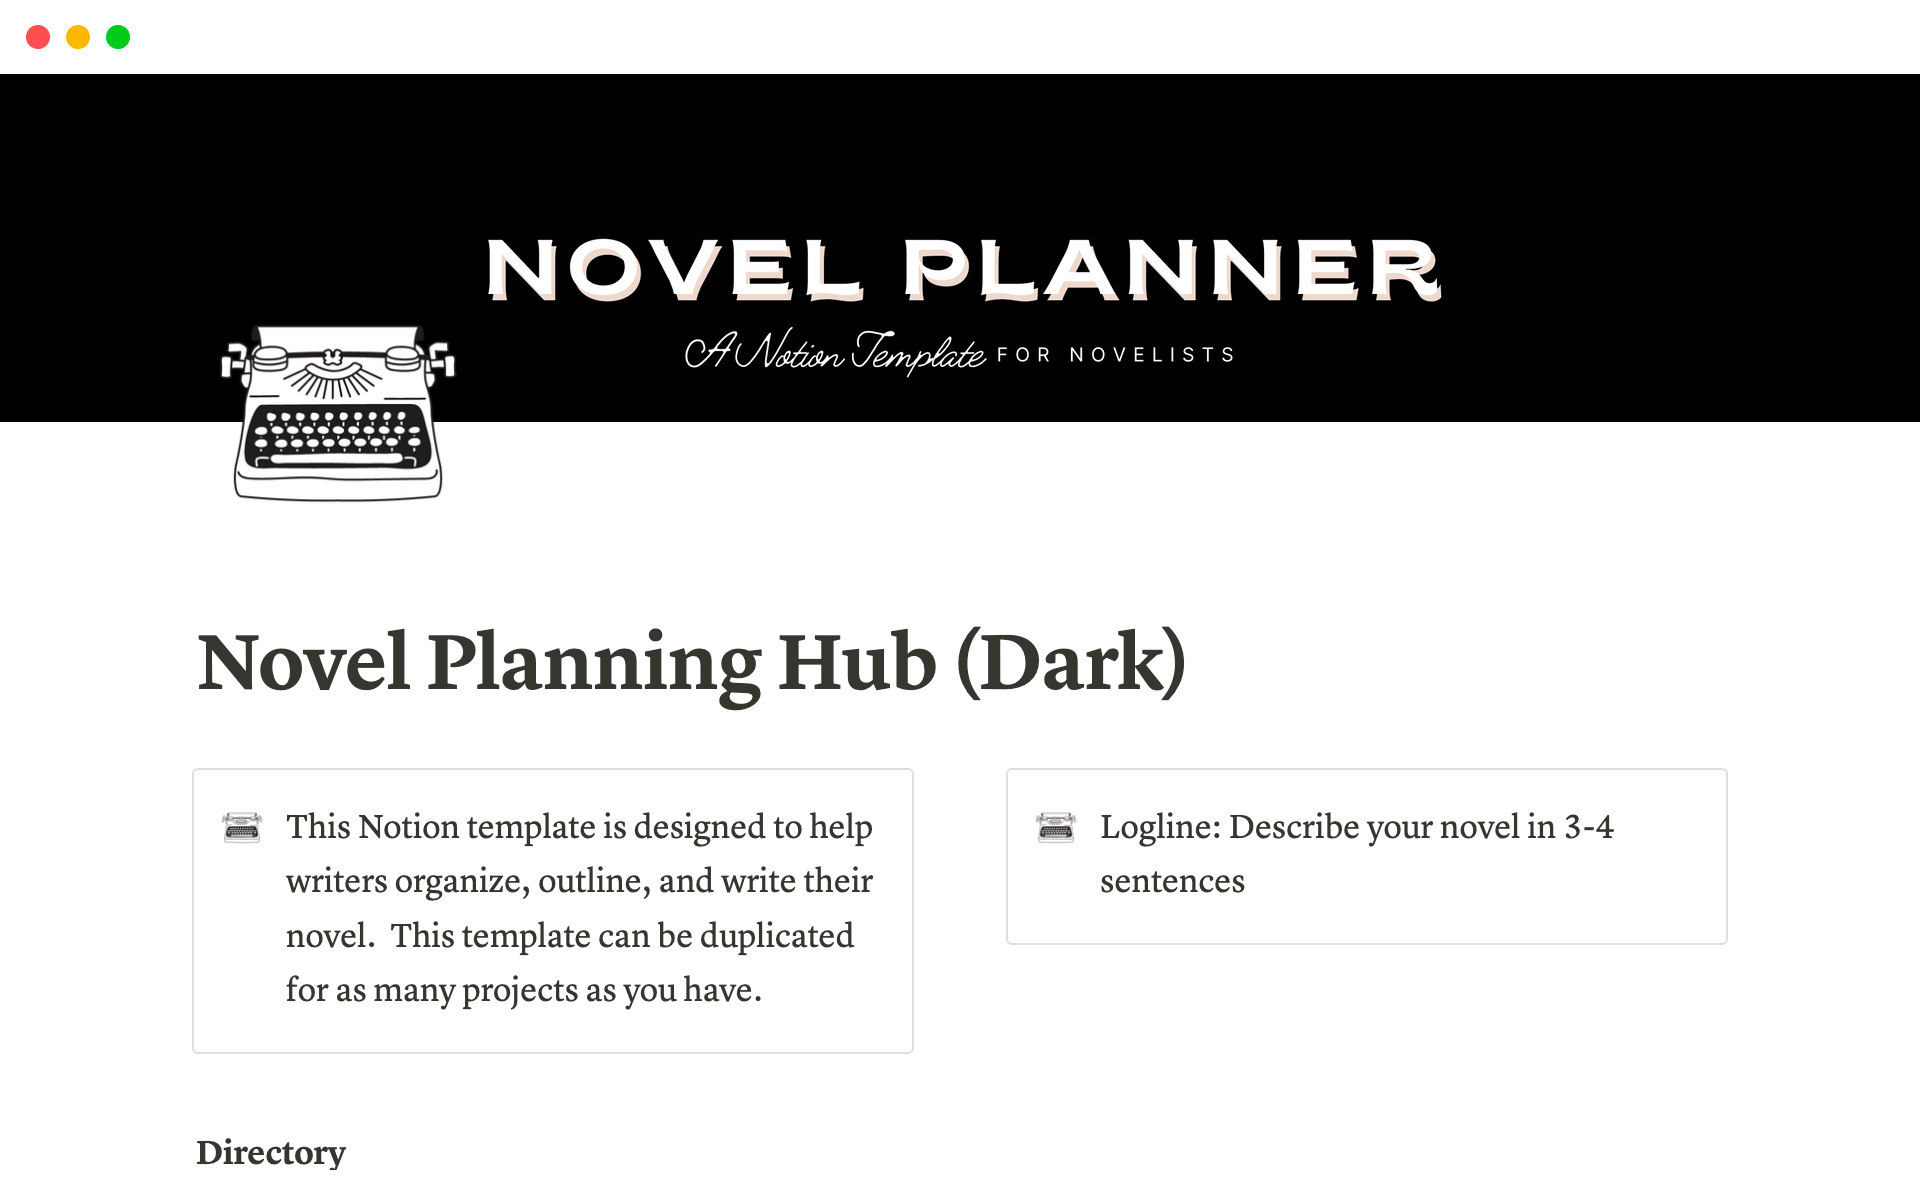 A template preview for Novel Planner in Notion